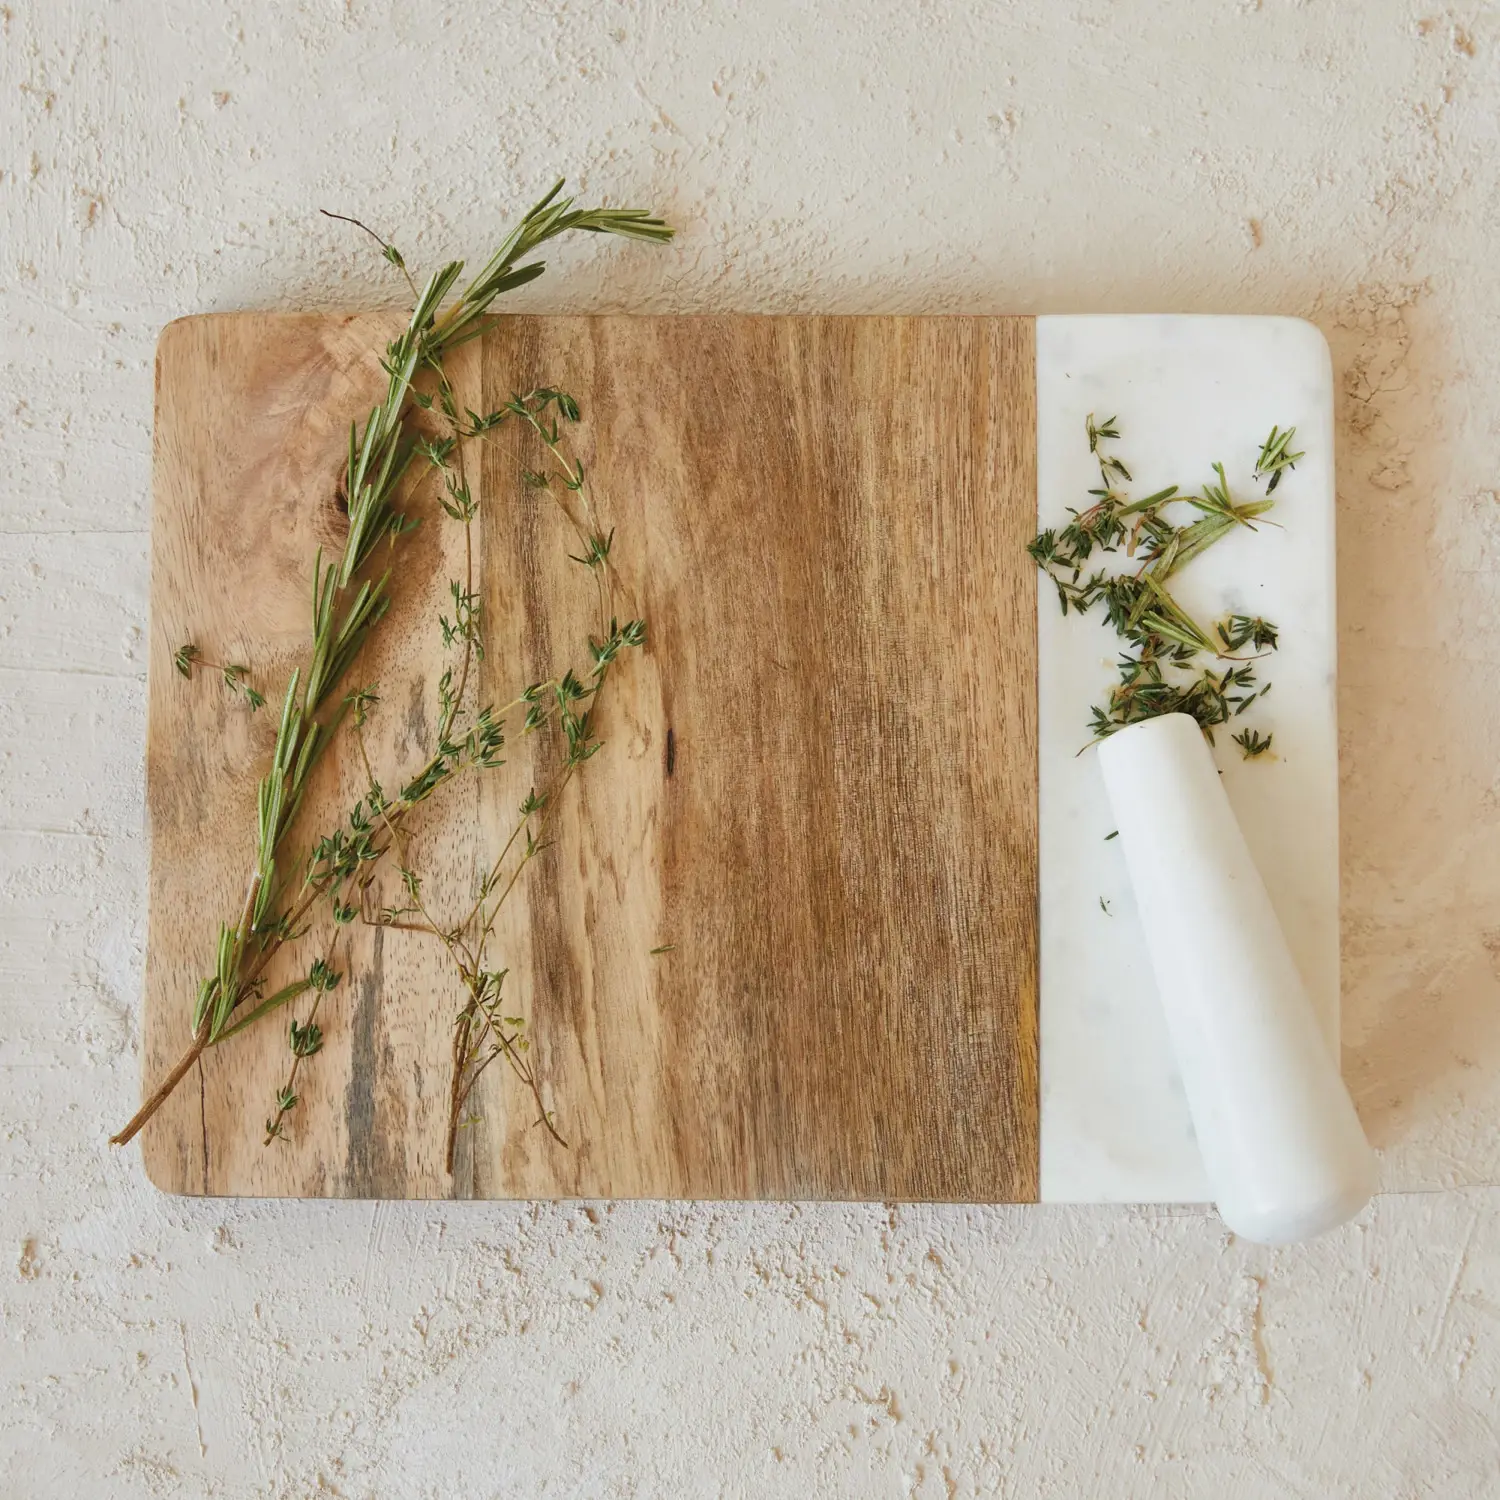 Mango Wood and Marble Cheese Serving Board with Marble and Pestle